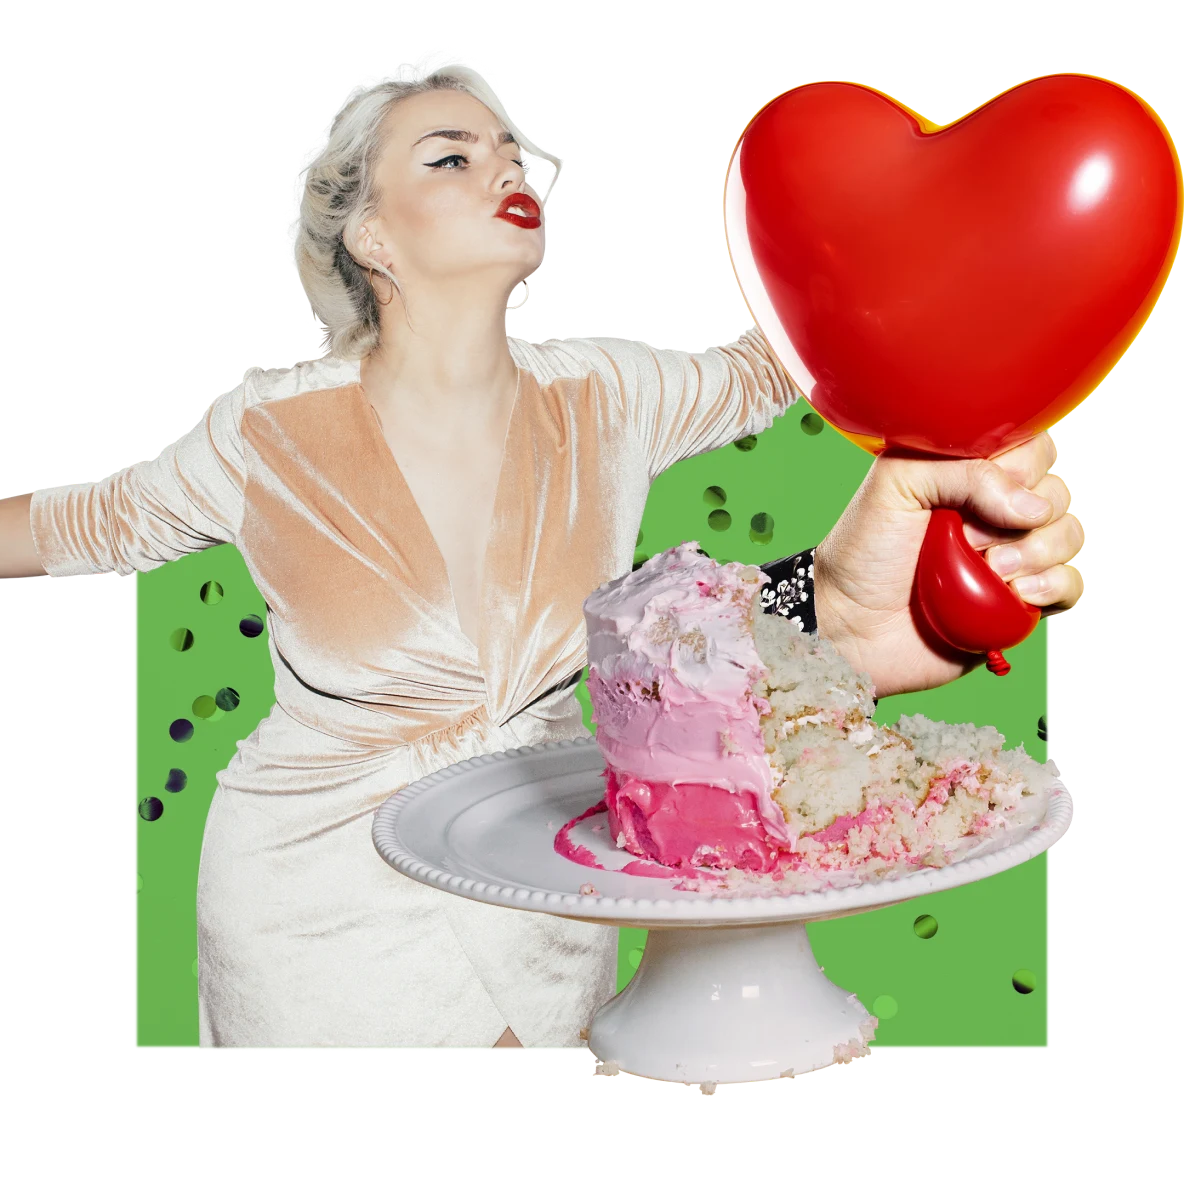 Collage of party themes. On the left, white woman with blonde hair and bright red lipstick dances in a pink dress. Half-eaten pink cake on a white platter. White hand squeezes the bottom of a red heart-shaped balloon.